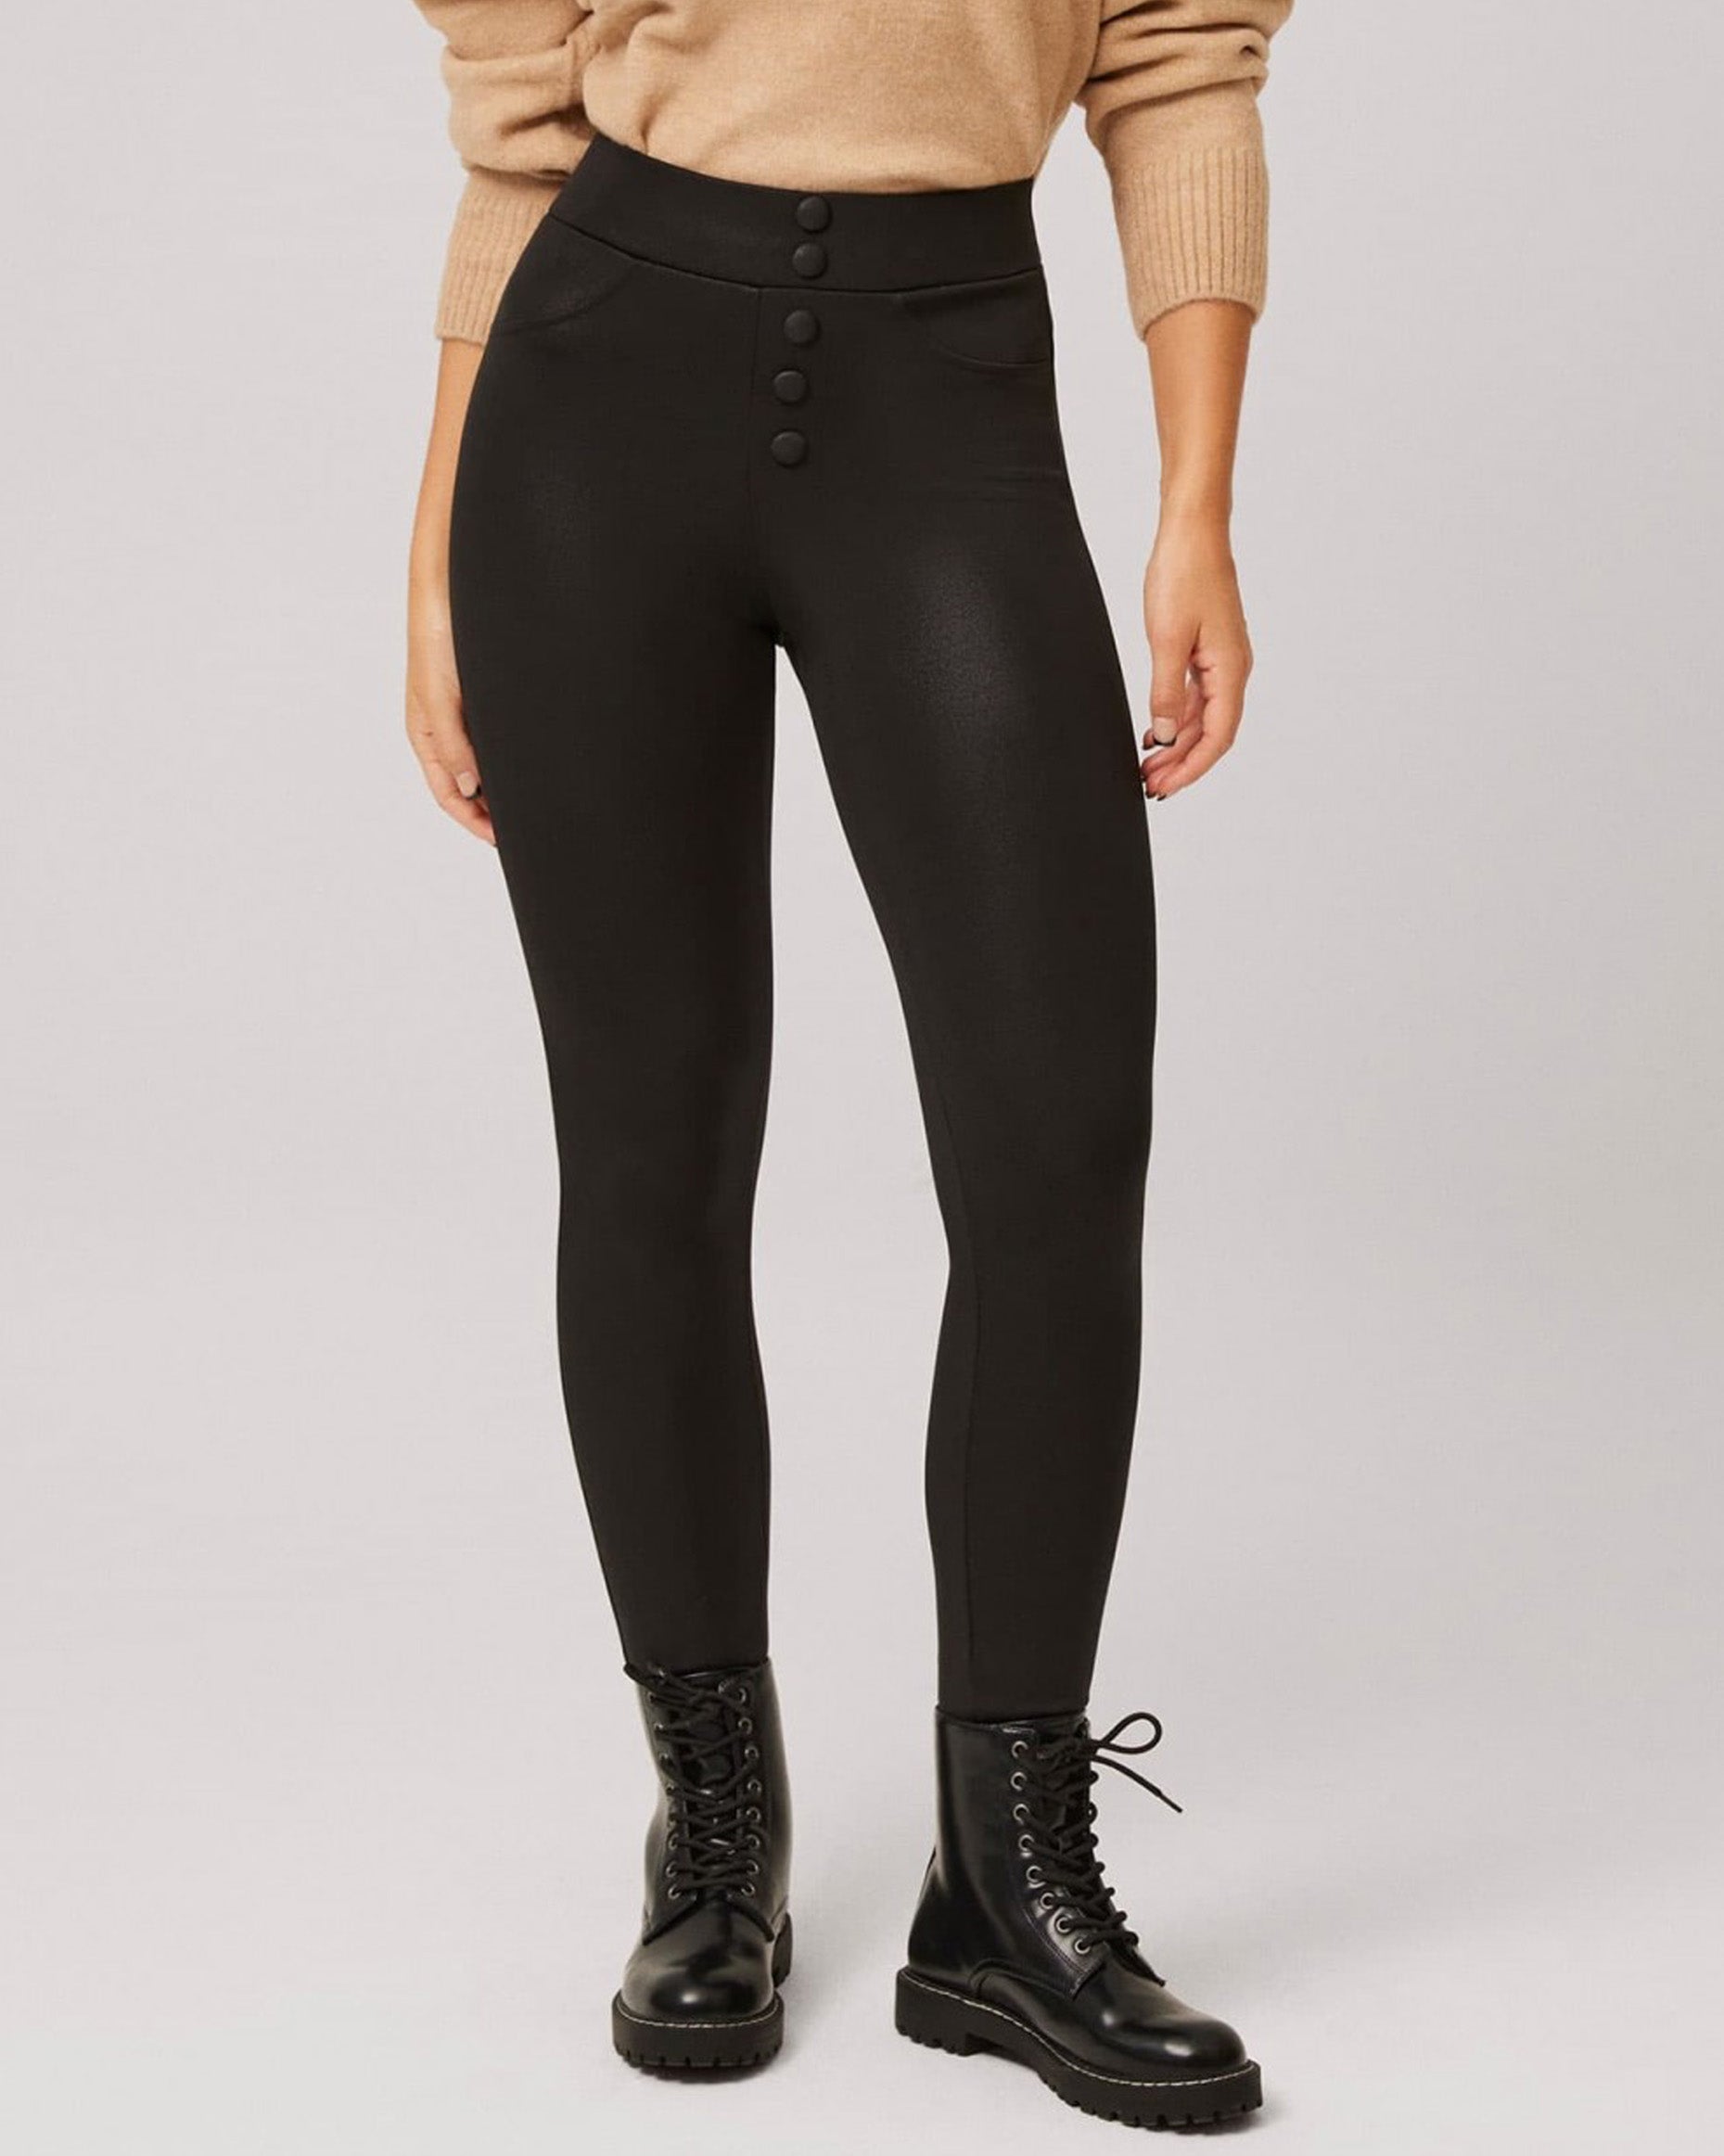 Ysabel Mora 70294 Waxed Thermal Leggings - Black high waisted trouser leggings (treggings) with waxed / faux leather effect coating, warm fleece lining, faux front black buttons and faux front pocket stitching, worn with camel jumper and black laced up boots.